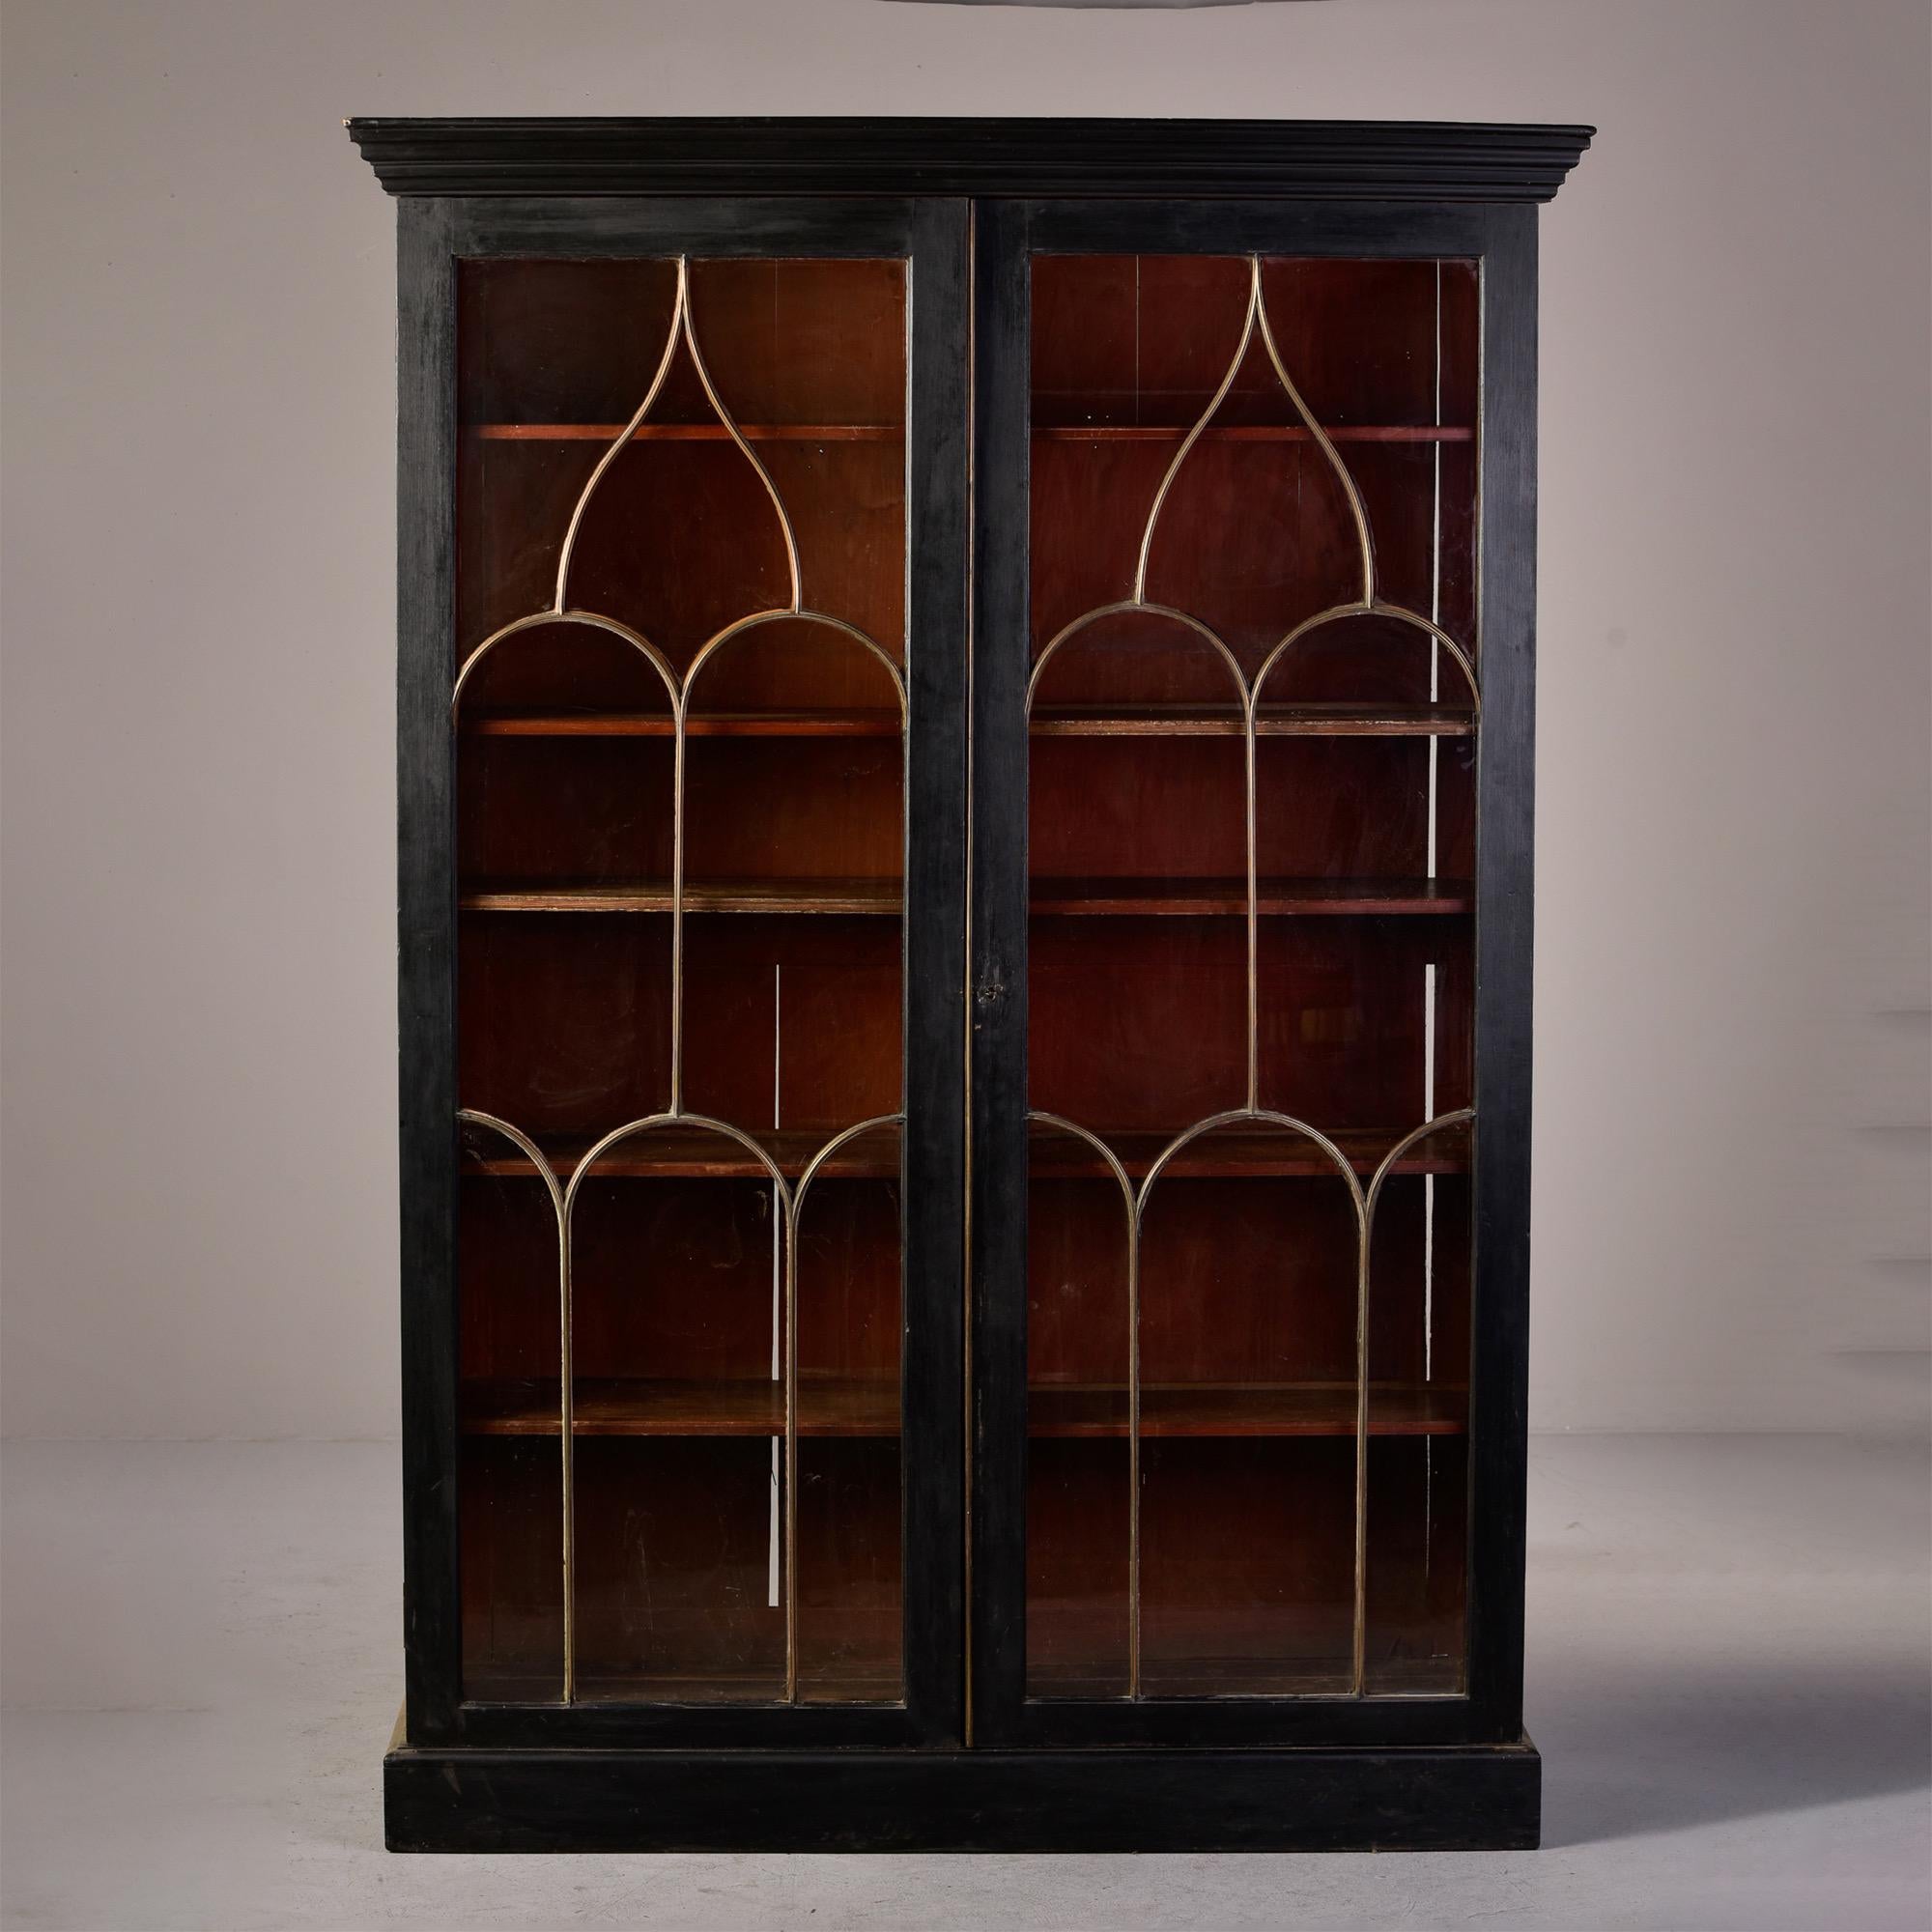 Circa 1890s tall English bookcase with gothic style brass glazing bars on front doors. Each side has five adjustable shelves. Functional lock with key on door. Exterior is painted in matte black and contrasts nicely with dark wood interior. Unknown